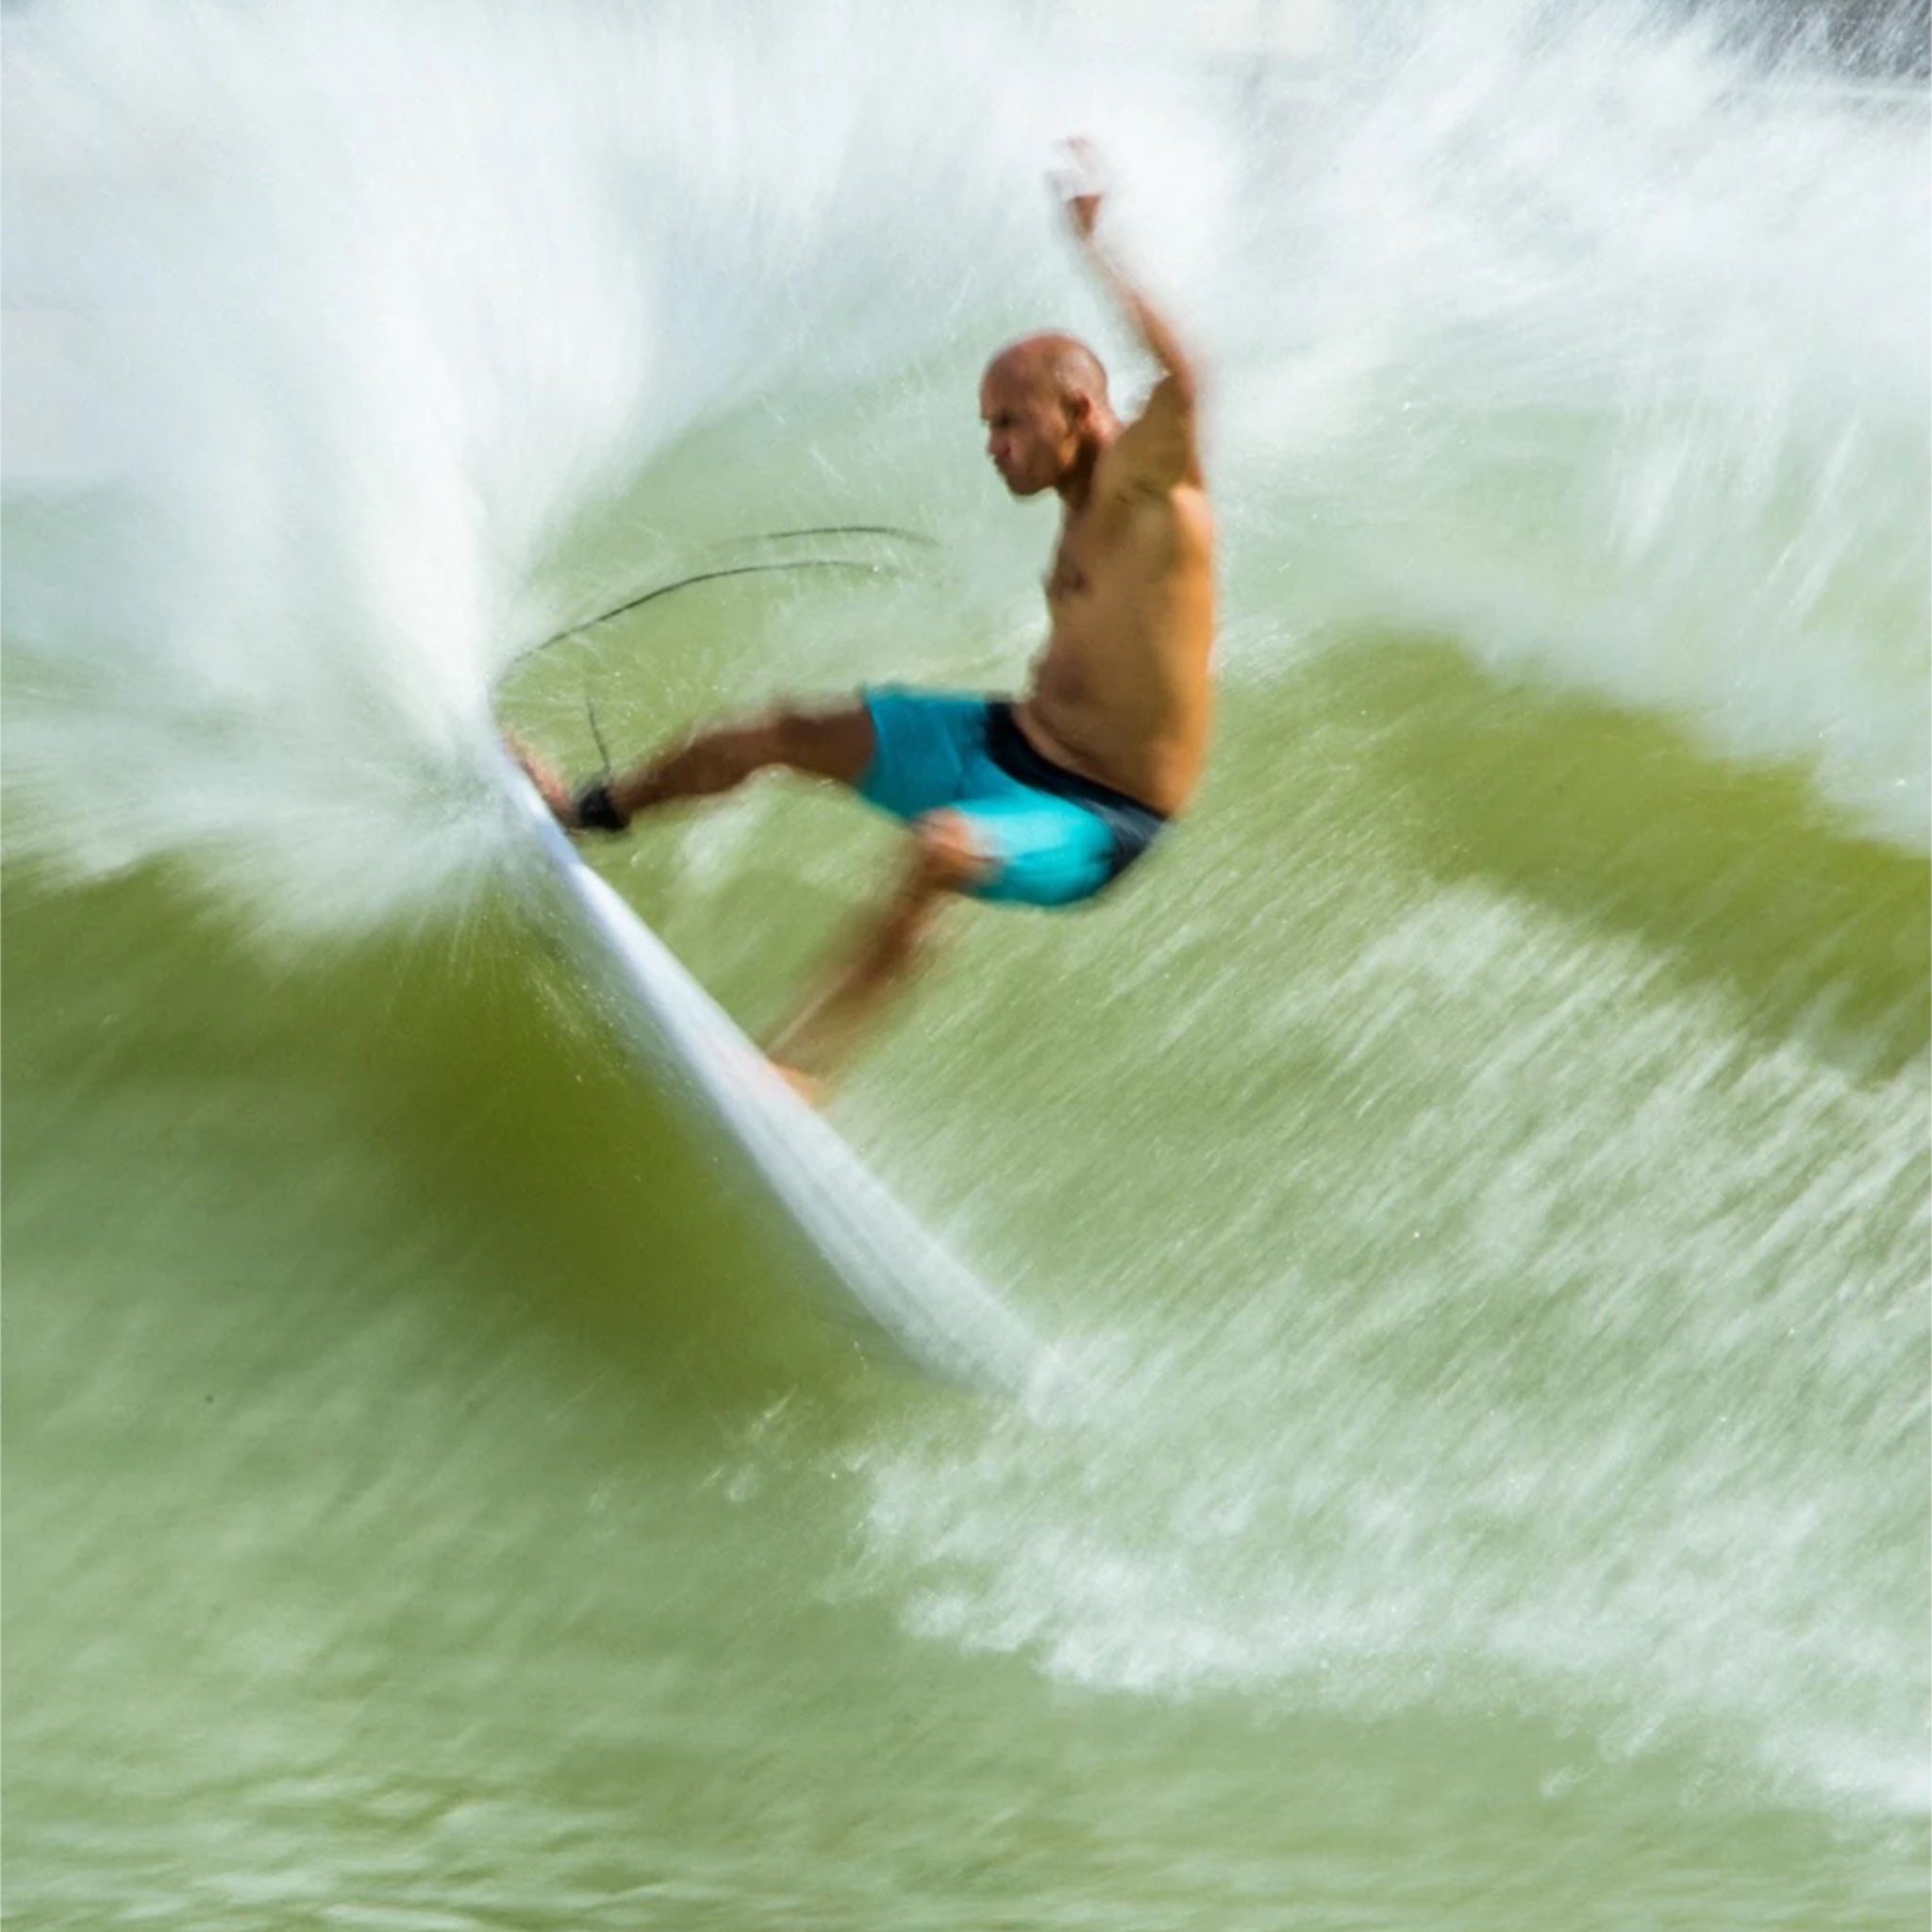 KELLY SLATER OUTERKNOWN